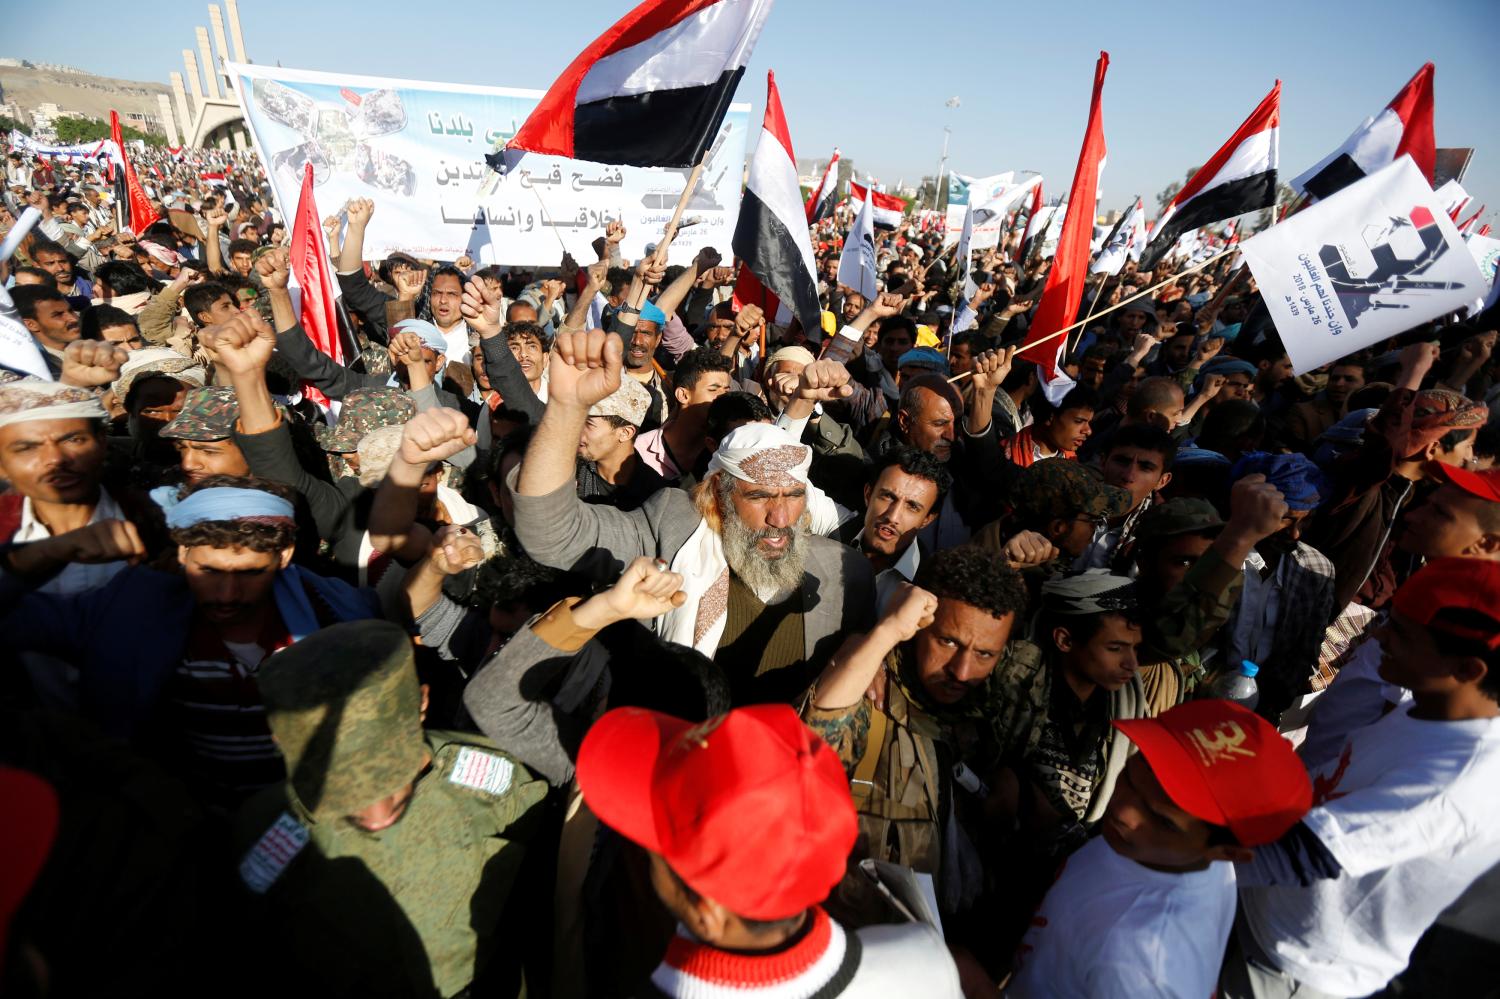 Houthi supporters attend a rally to mark the third anniversary of the Saudi-led intervention in the Yemeni conflict in Sanaa, Yemen March 26, 2018. REUTERS/Khaled Abdullah - RC12E2C83A90